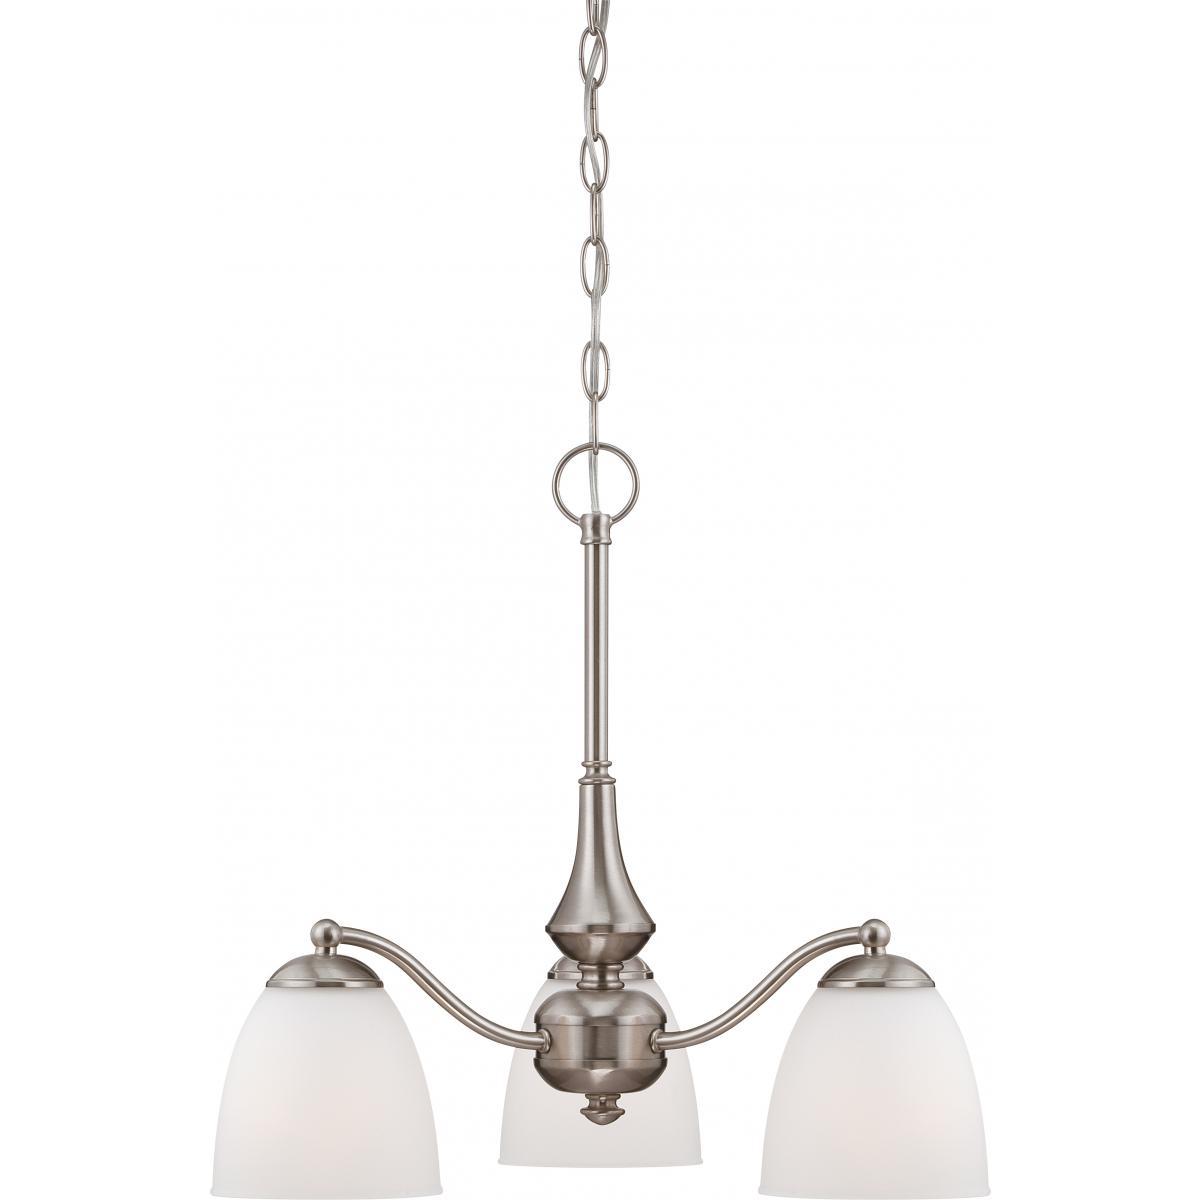 Patton 3 Light Chandelier (Arms Down) with Frosted Glass Ceiling Nuvo Lighting 